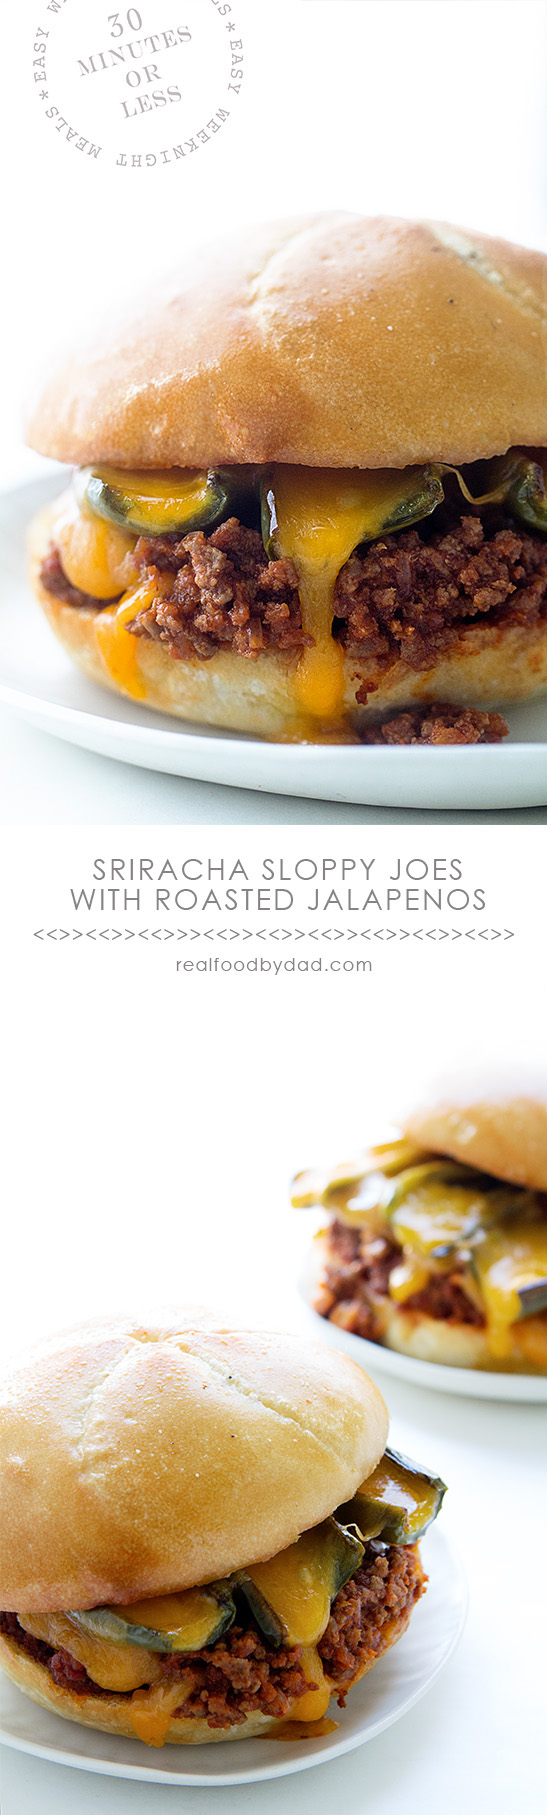 Sriracha Sloppy Joes with Roasted Jalapenos from Real Food by Dad